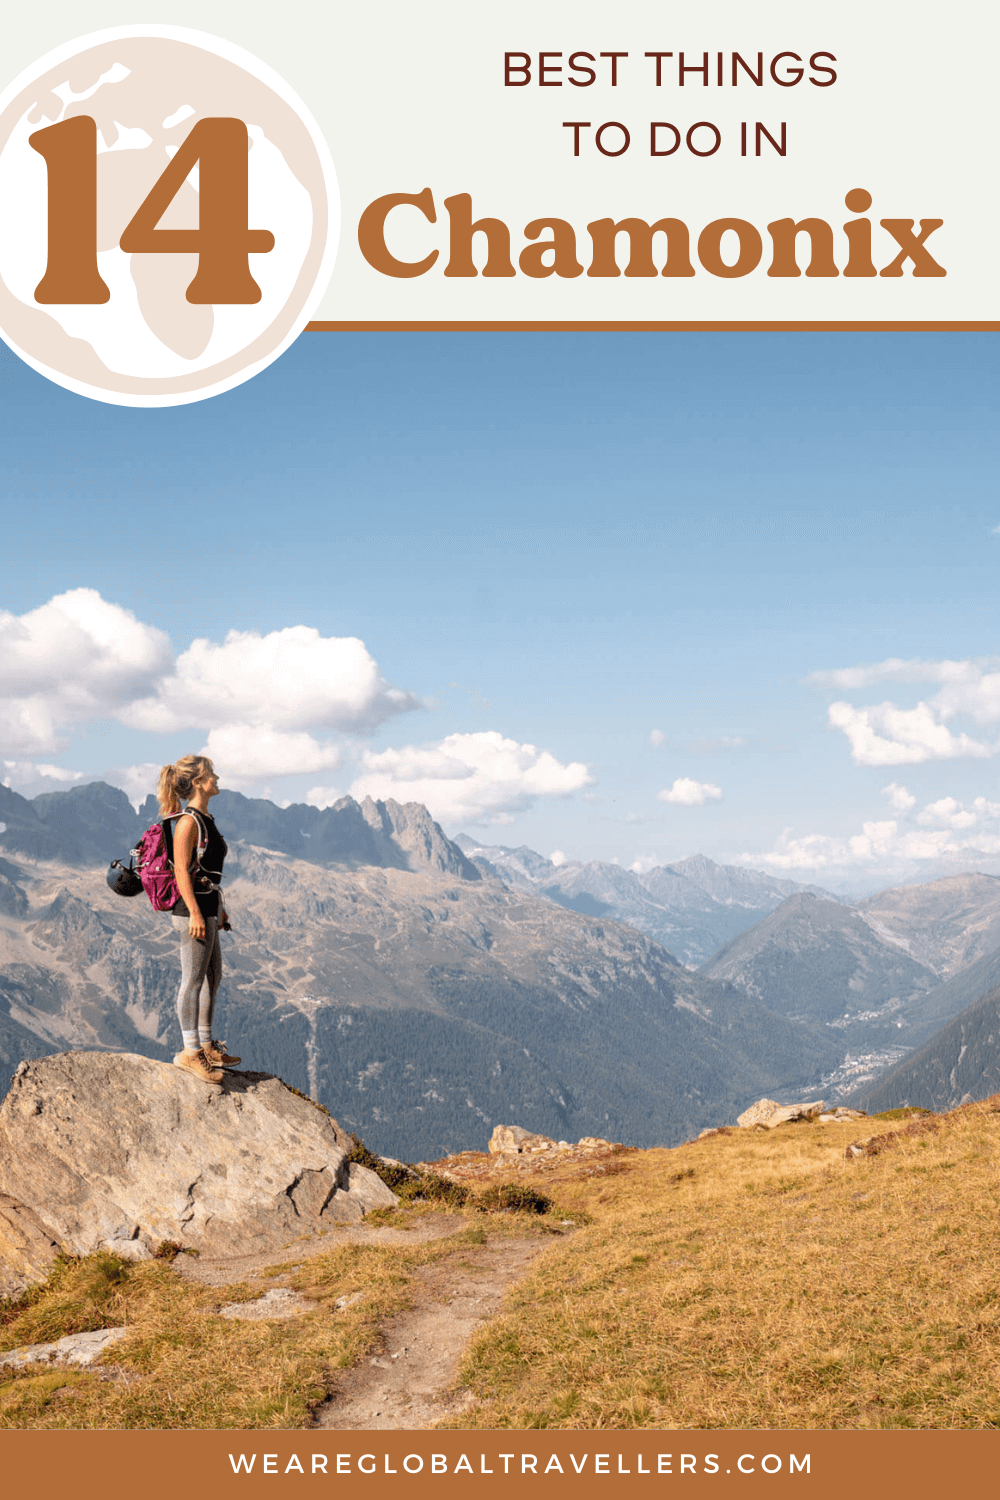 The best things to do in Chamonix, France